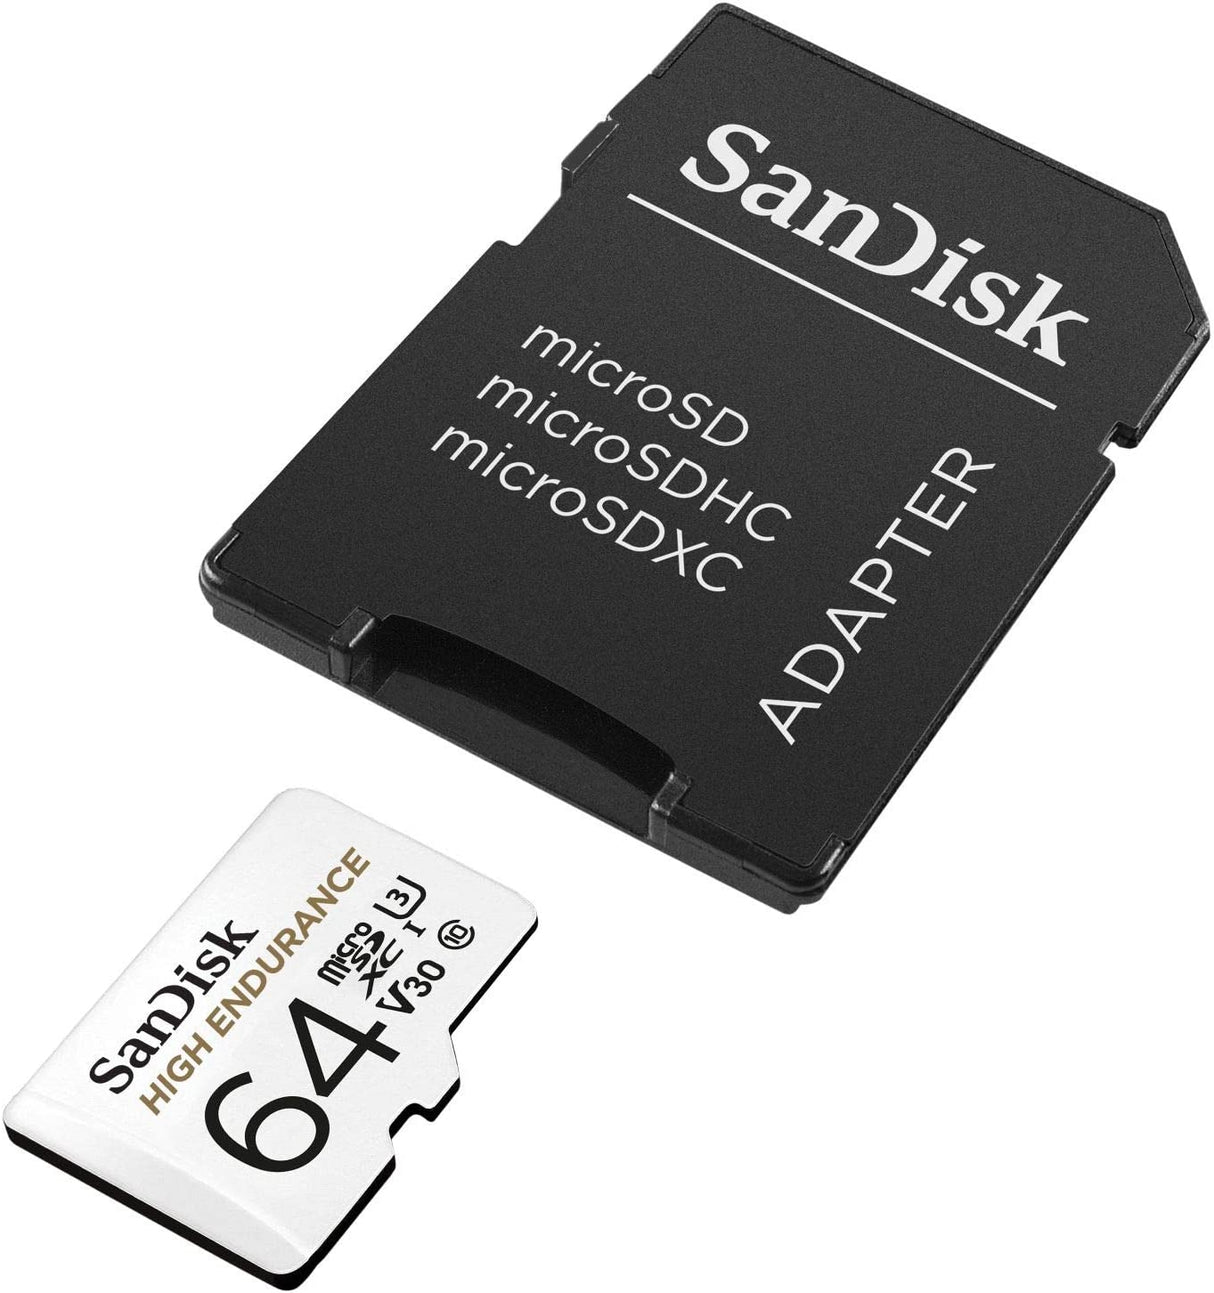 SanDisk 64GB High Endurance Video MicroSDXC Card with Adapter for Dash Cam and Home Monitoring Systems - C10, U3, V30, 4K UHD, Micro SD Card - SDSQQNR-064G-GN6IA 64 GB Card Only